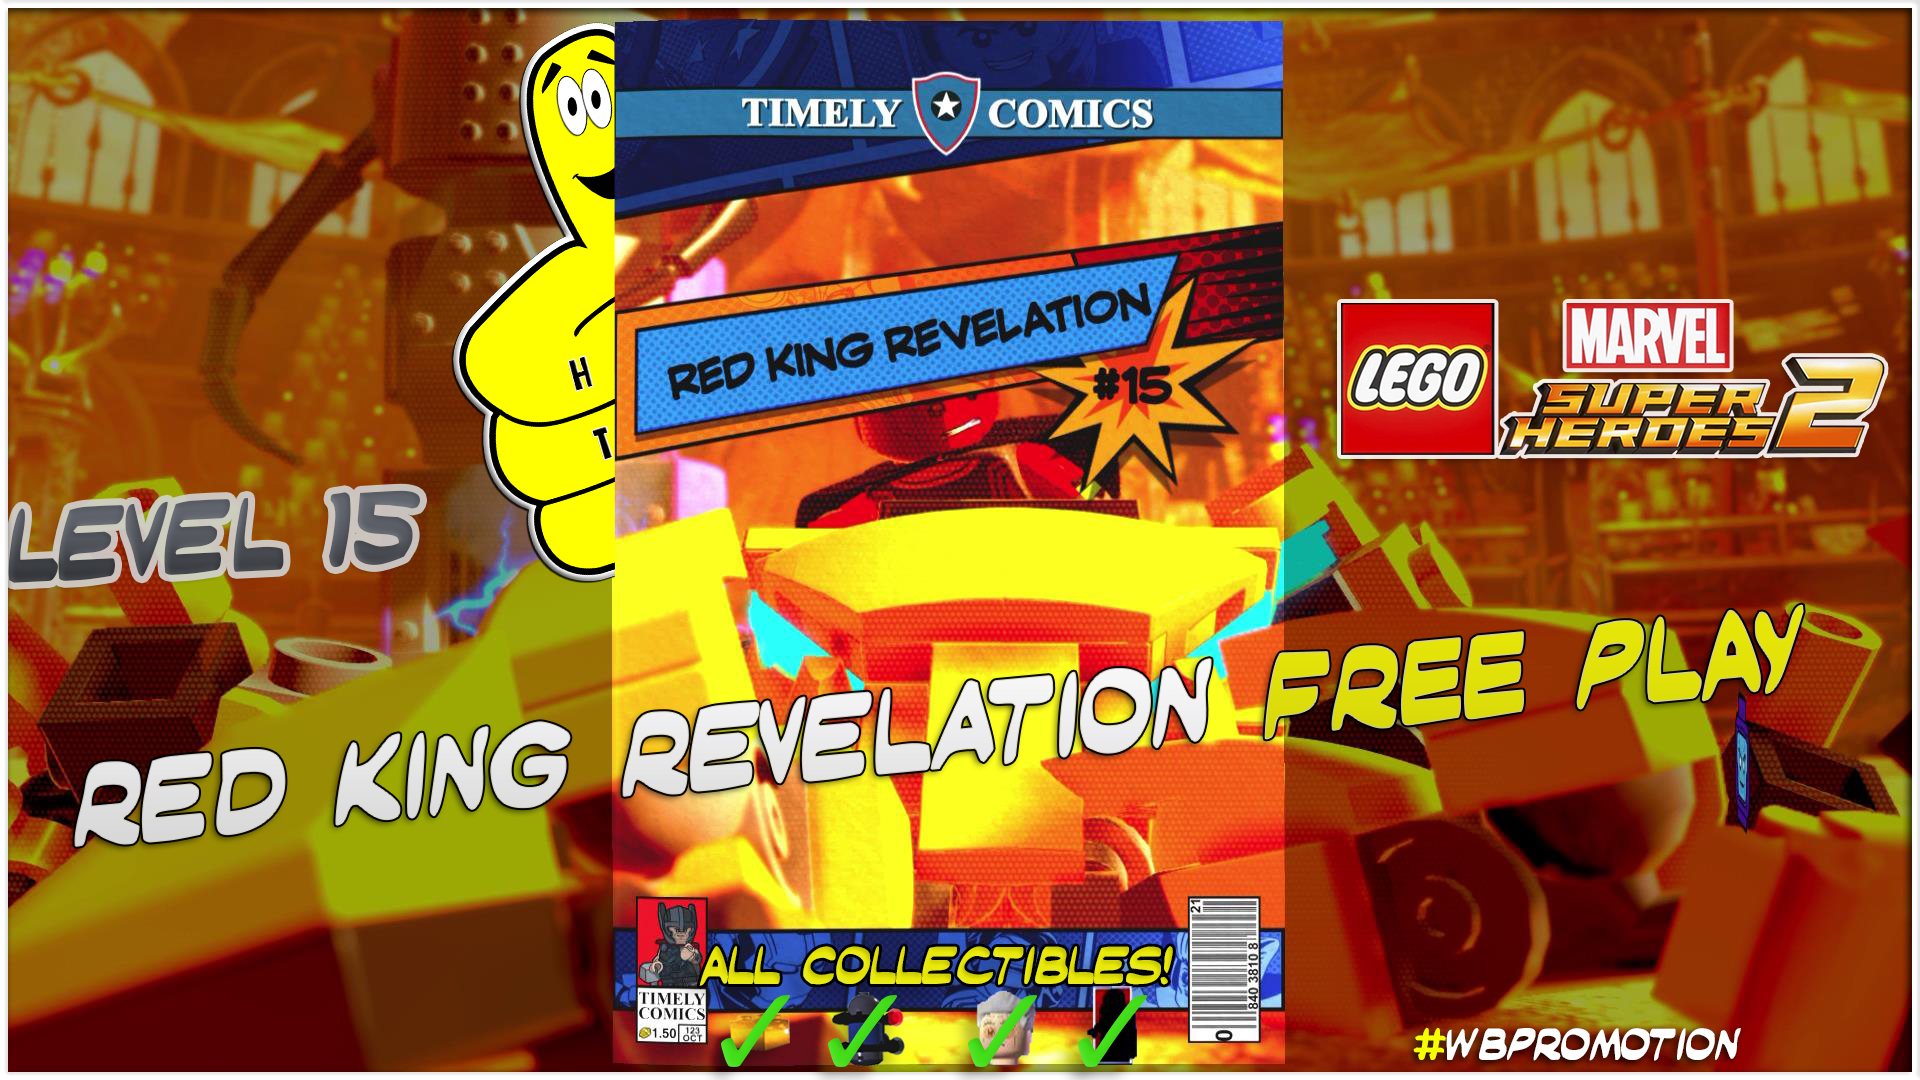 Lego Marvel Superheroes 2: Level 15 / Red King Revelation FREE PLAY (All Collectibles) – HTG